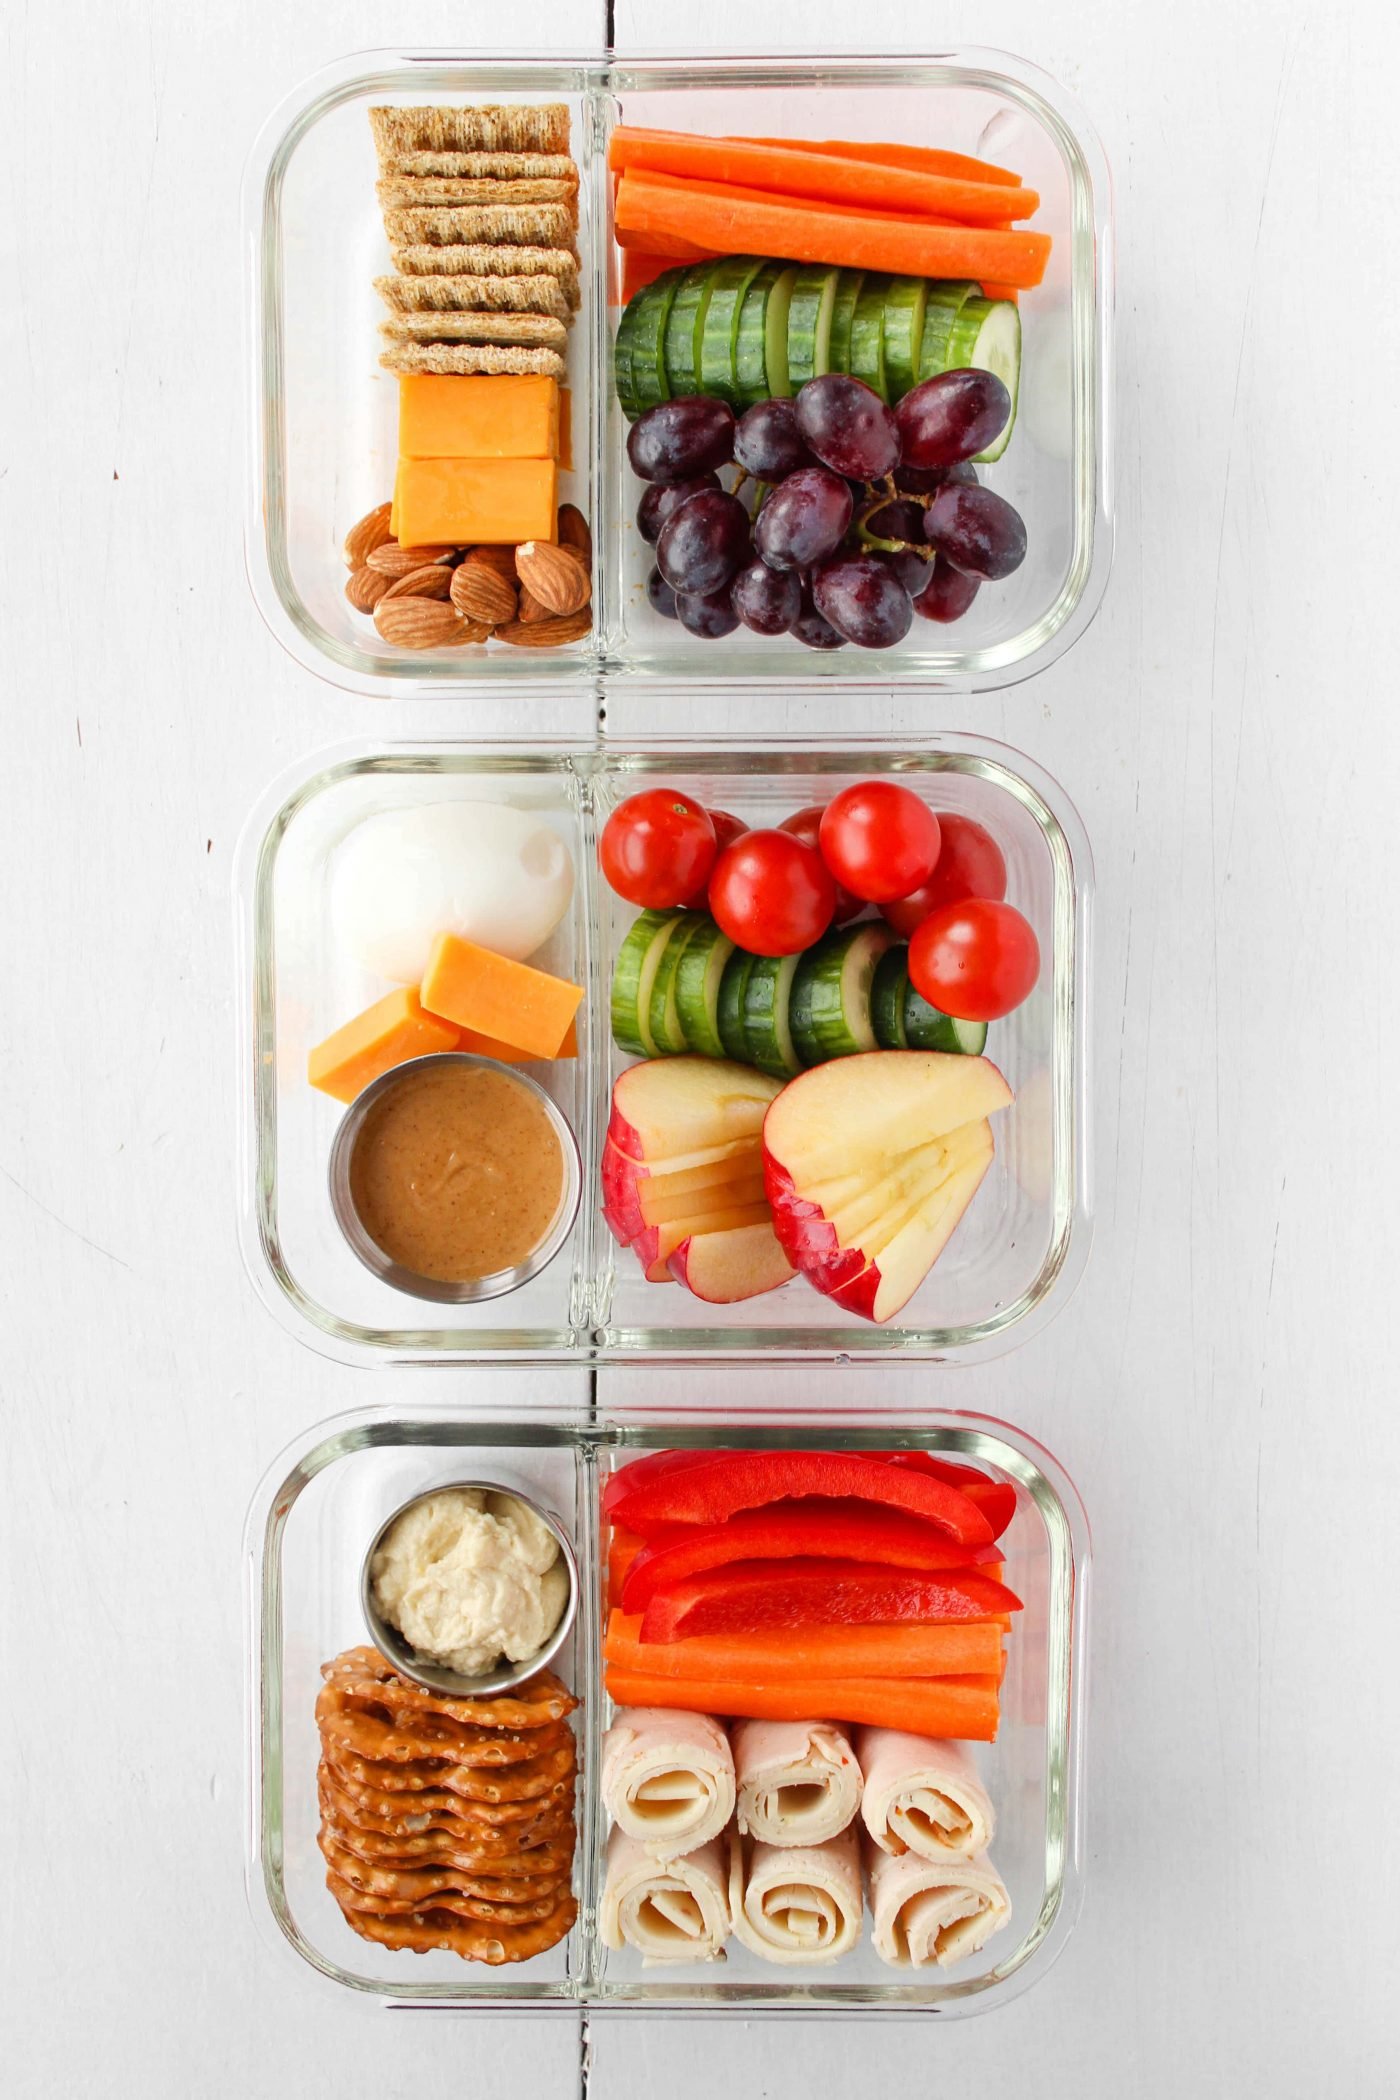 How to Make Homemade Lunchables (Make It or Buy It?)